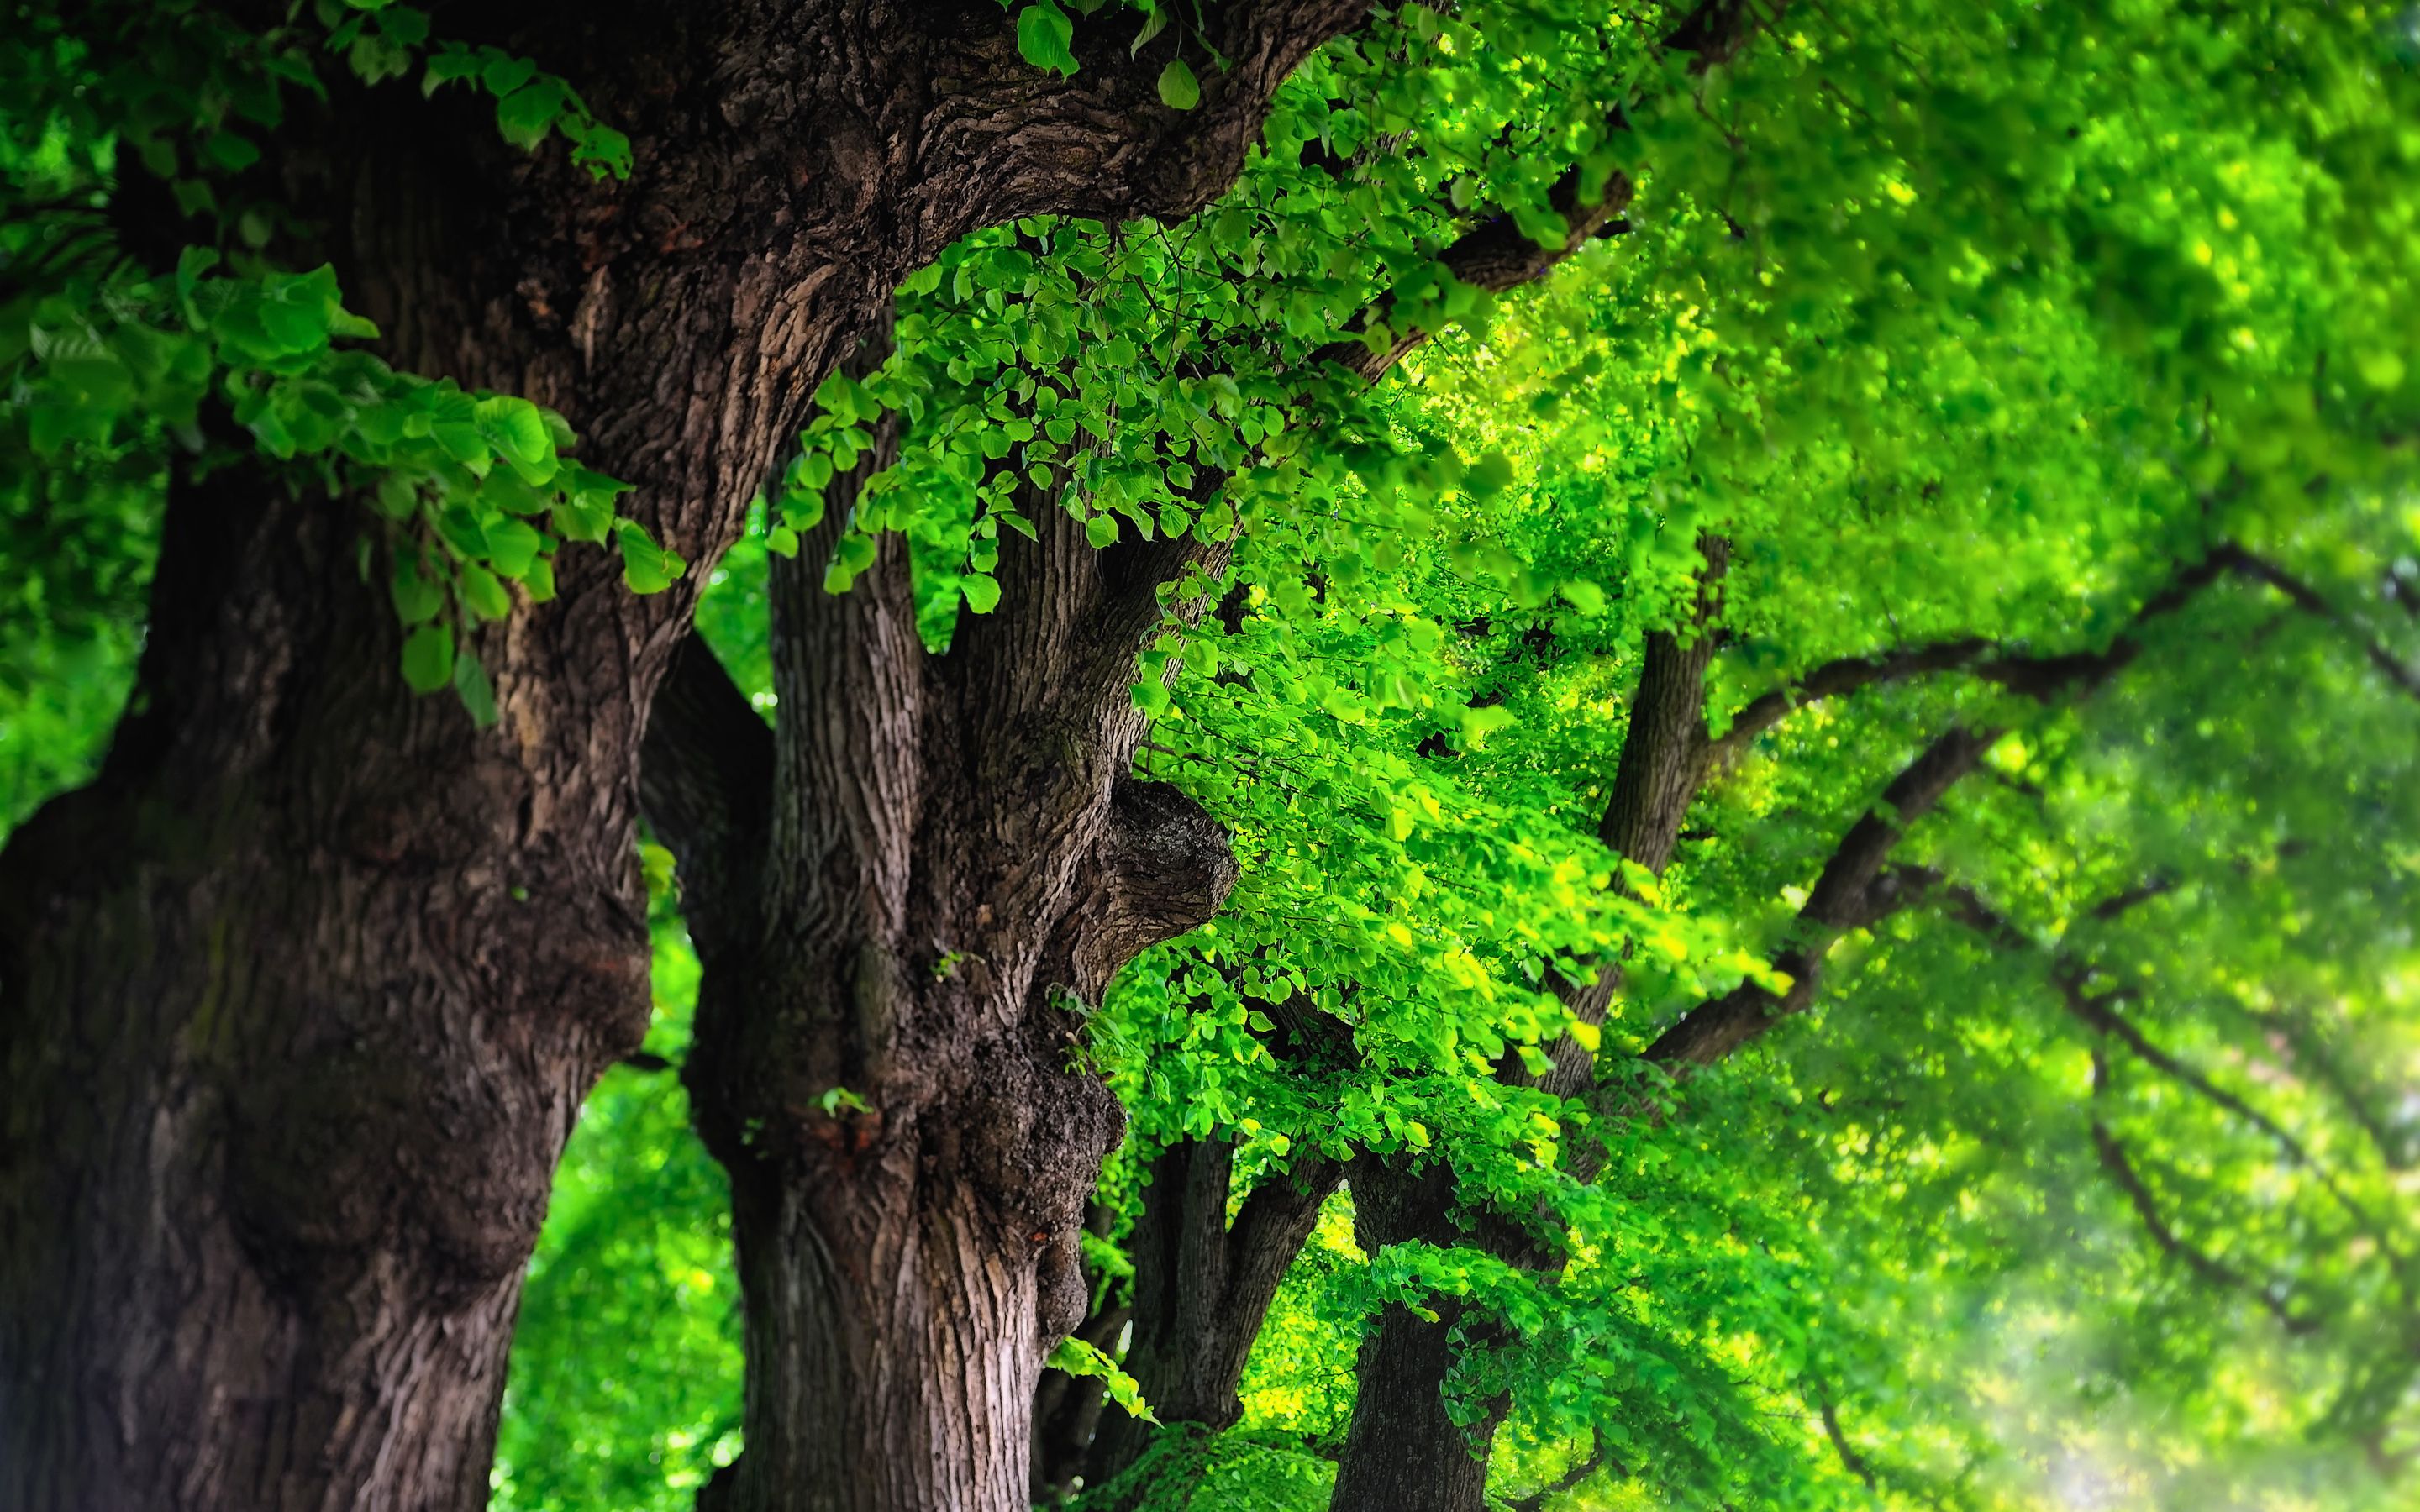 Green Nature Wallpaper and HD Background free download on PicGaGa